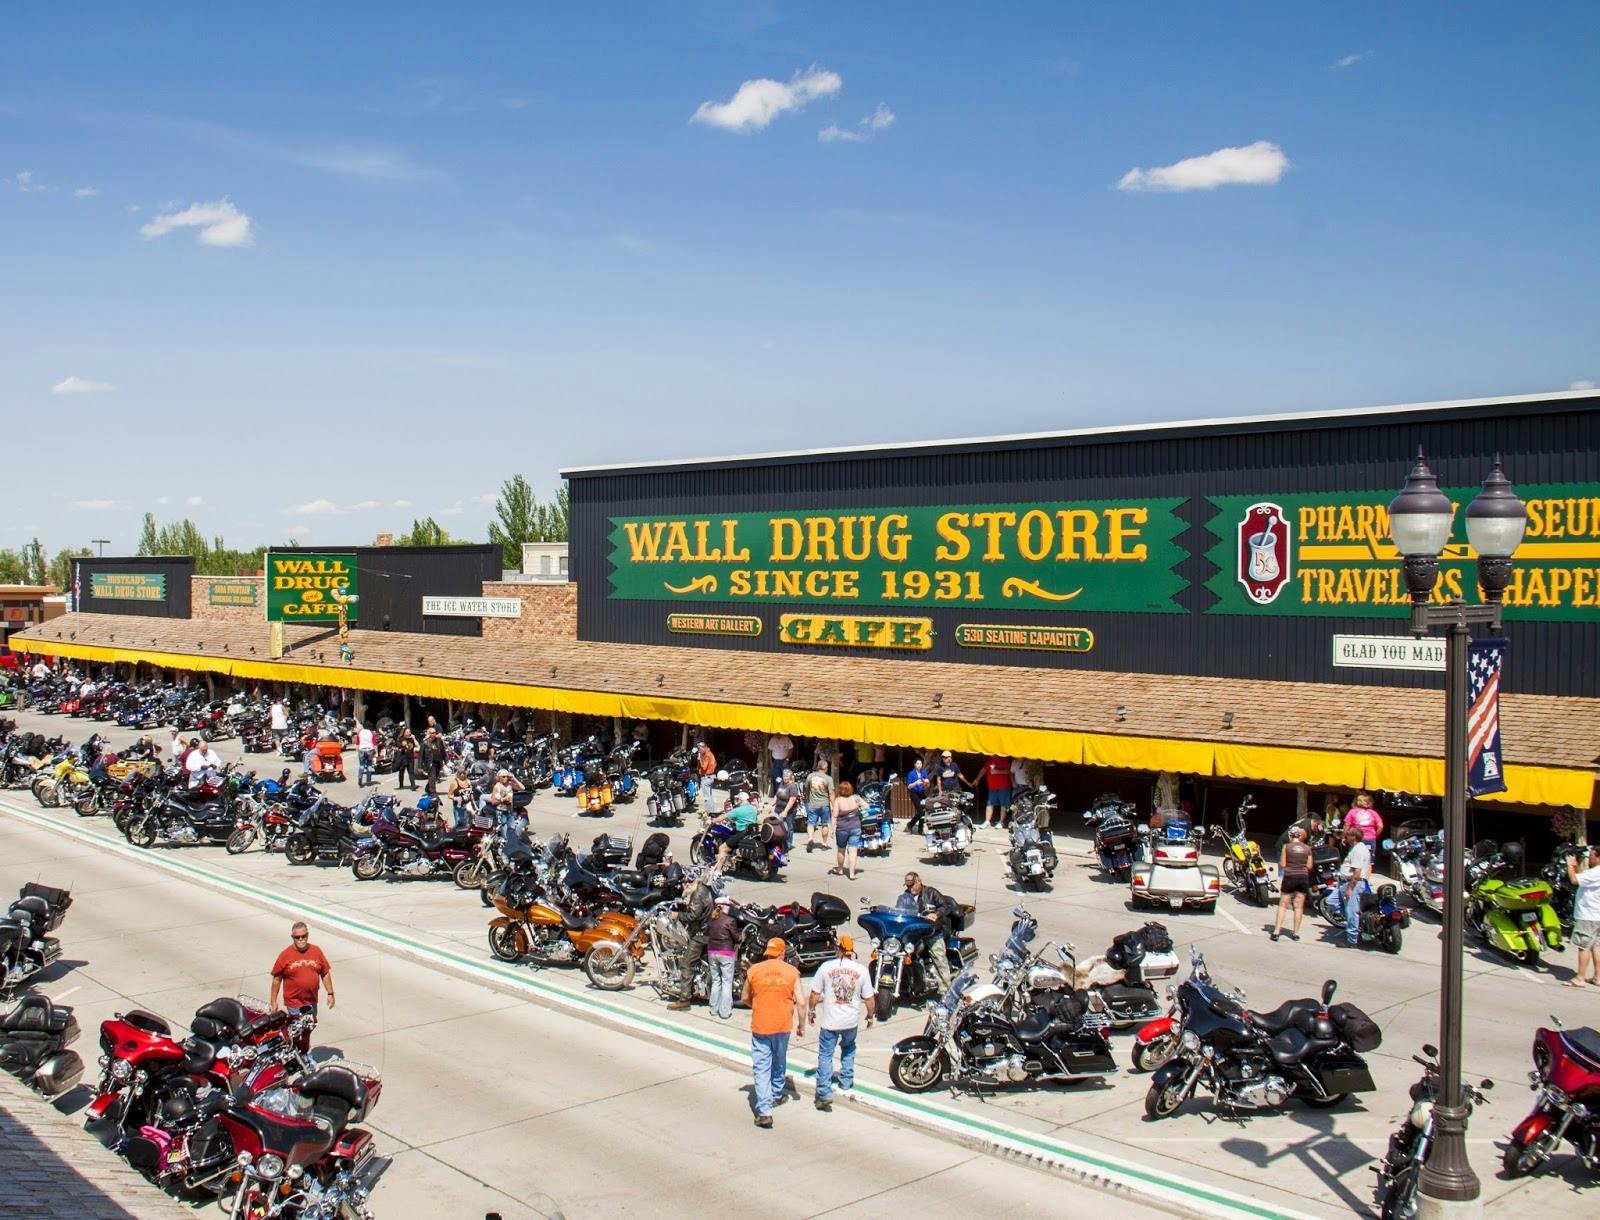 Image - Wall Drug Store